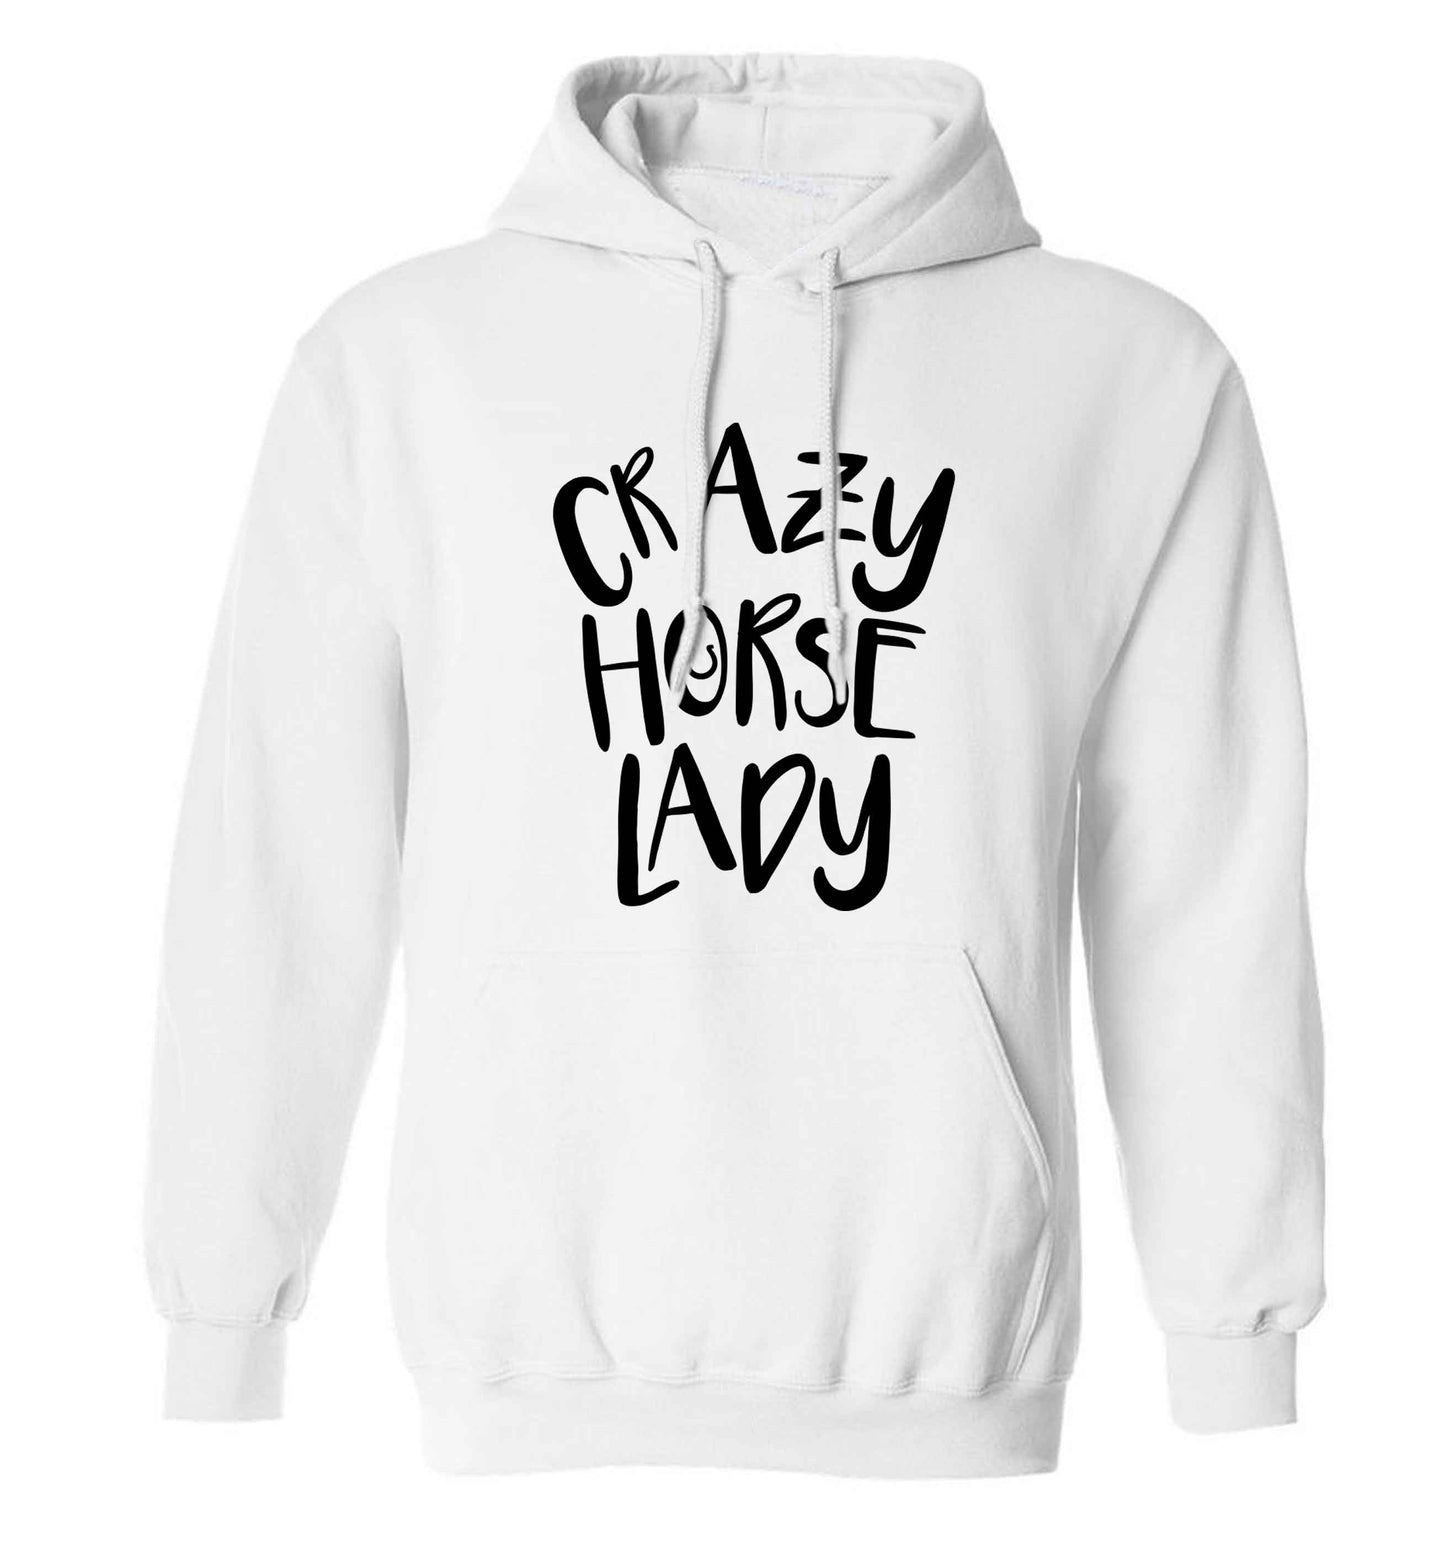 Crazy horse lady adults unisex white hoodie 2XL